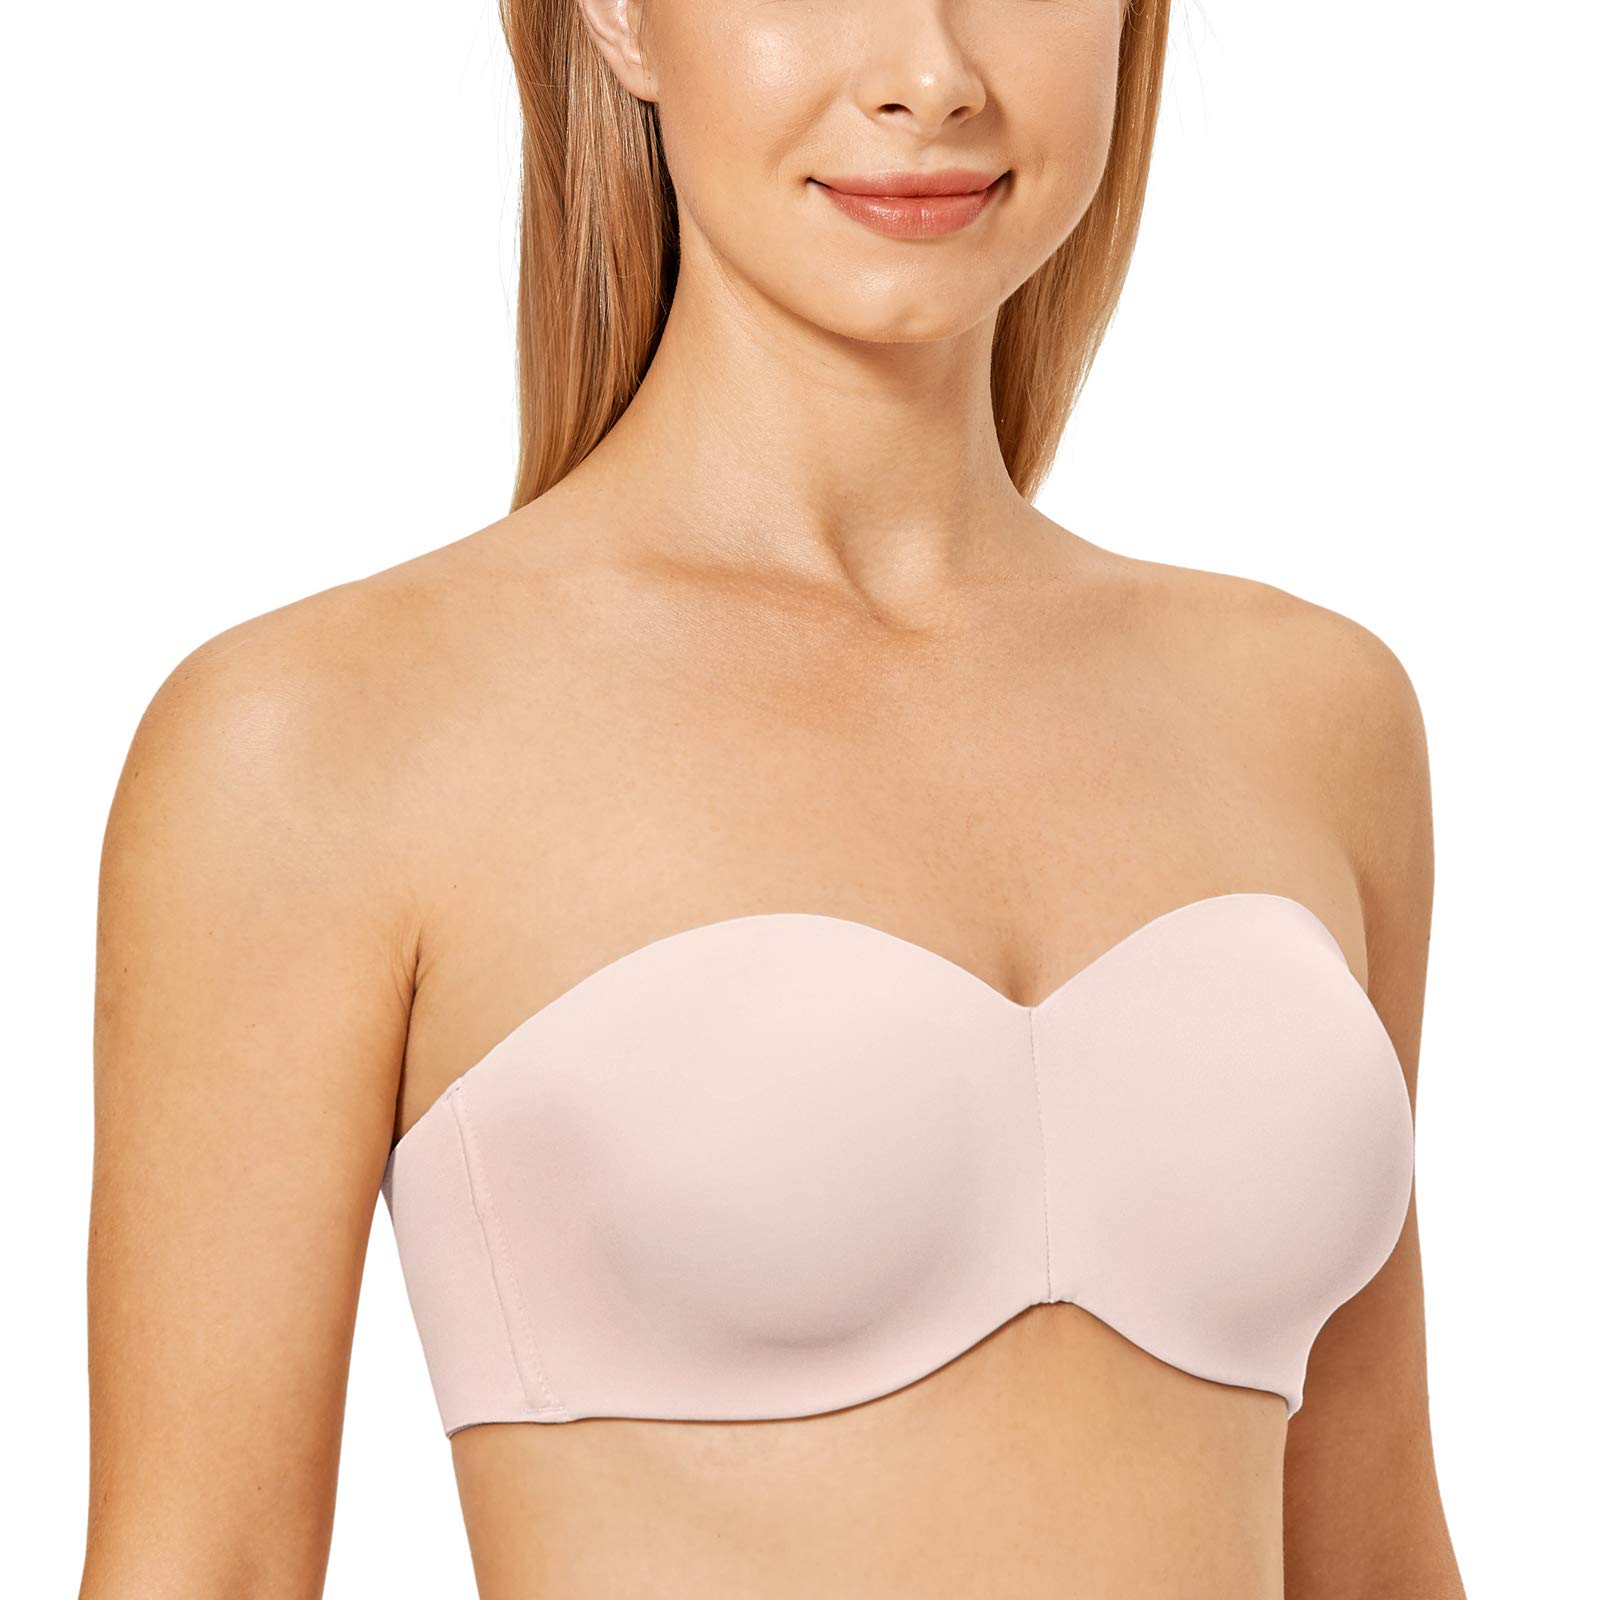 DELIMIRA Womens Strapless Bra Unlined Underwire Minimizer Plus Size Support Rose Smoked 36E